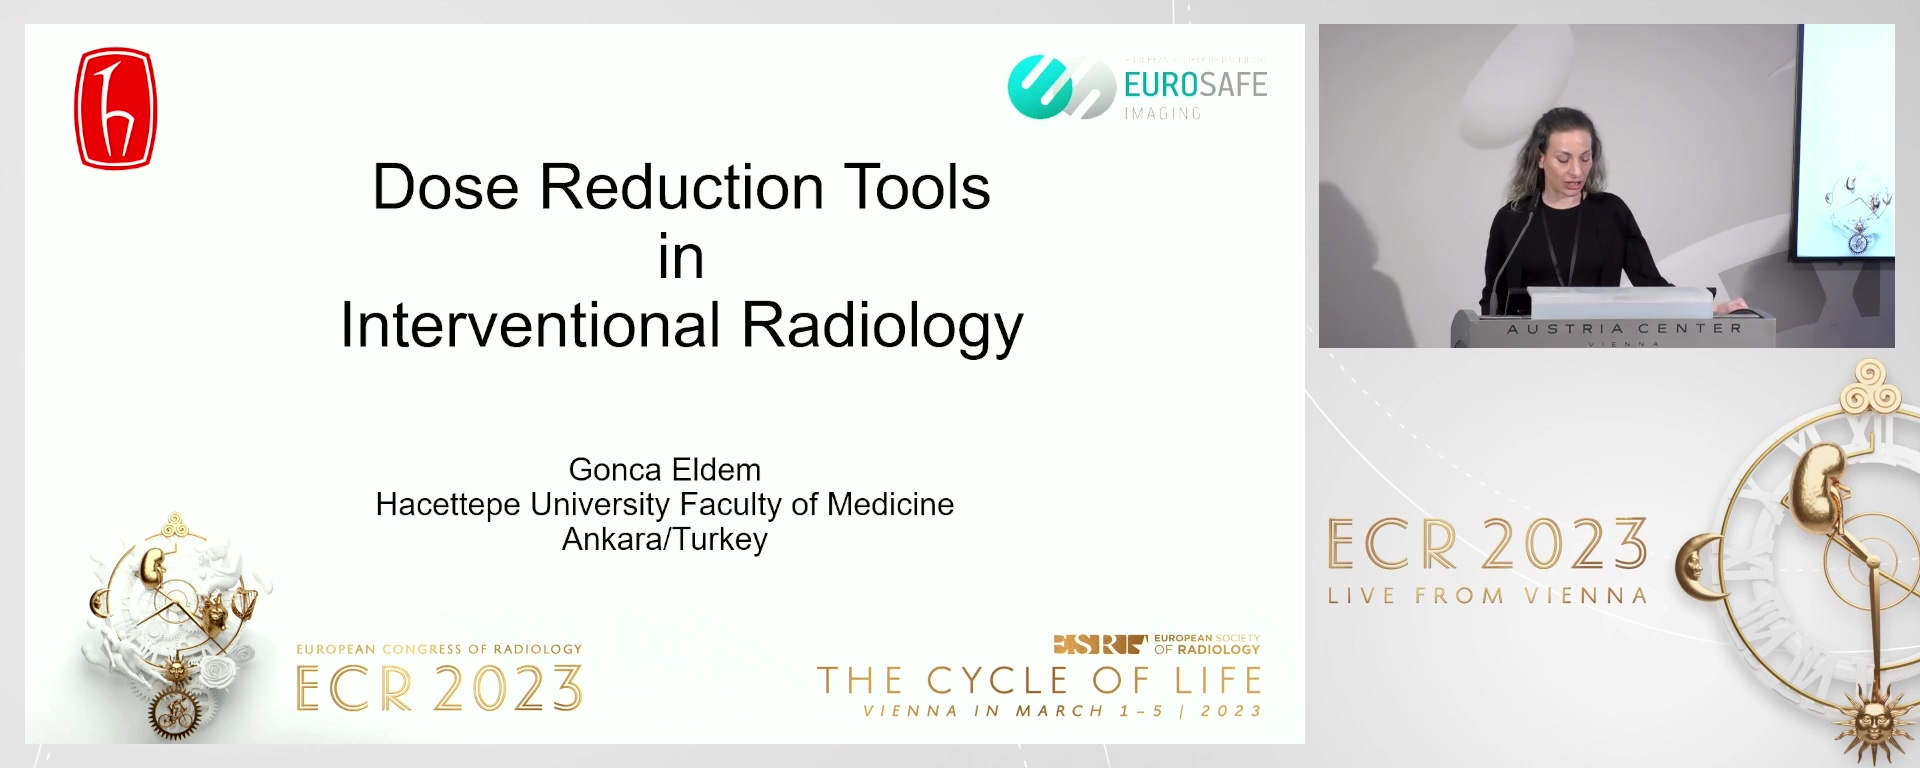 Dose reduction tools in interventional radiology